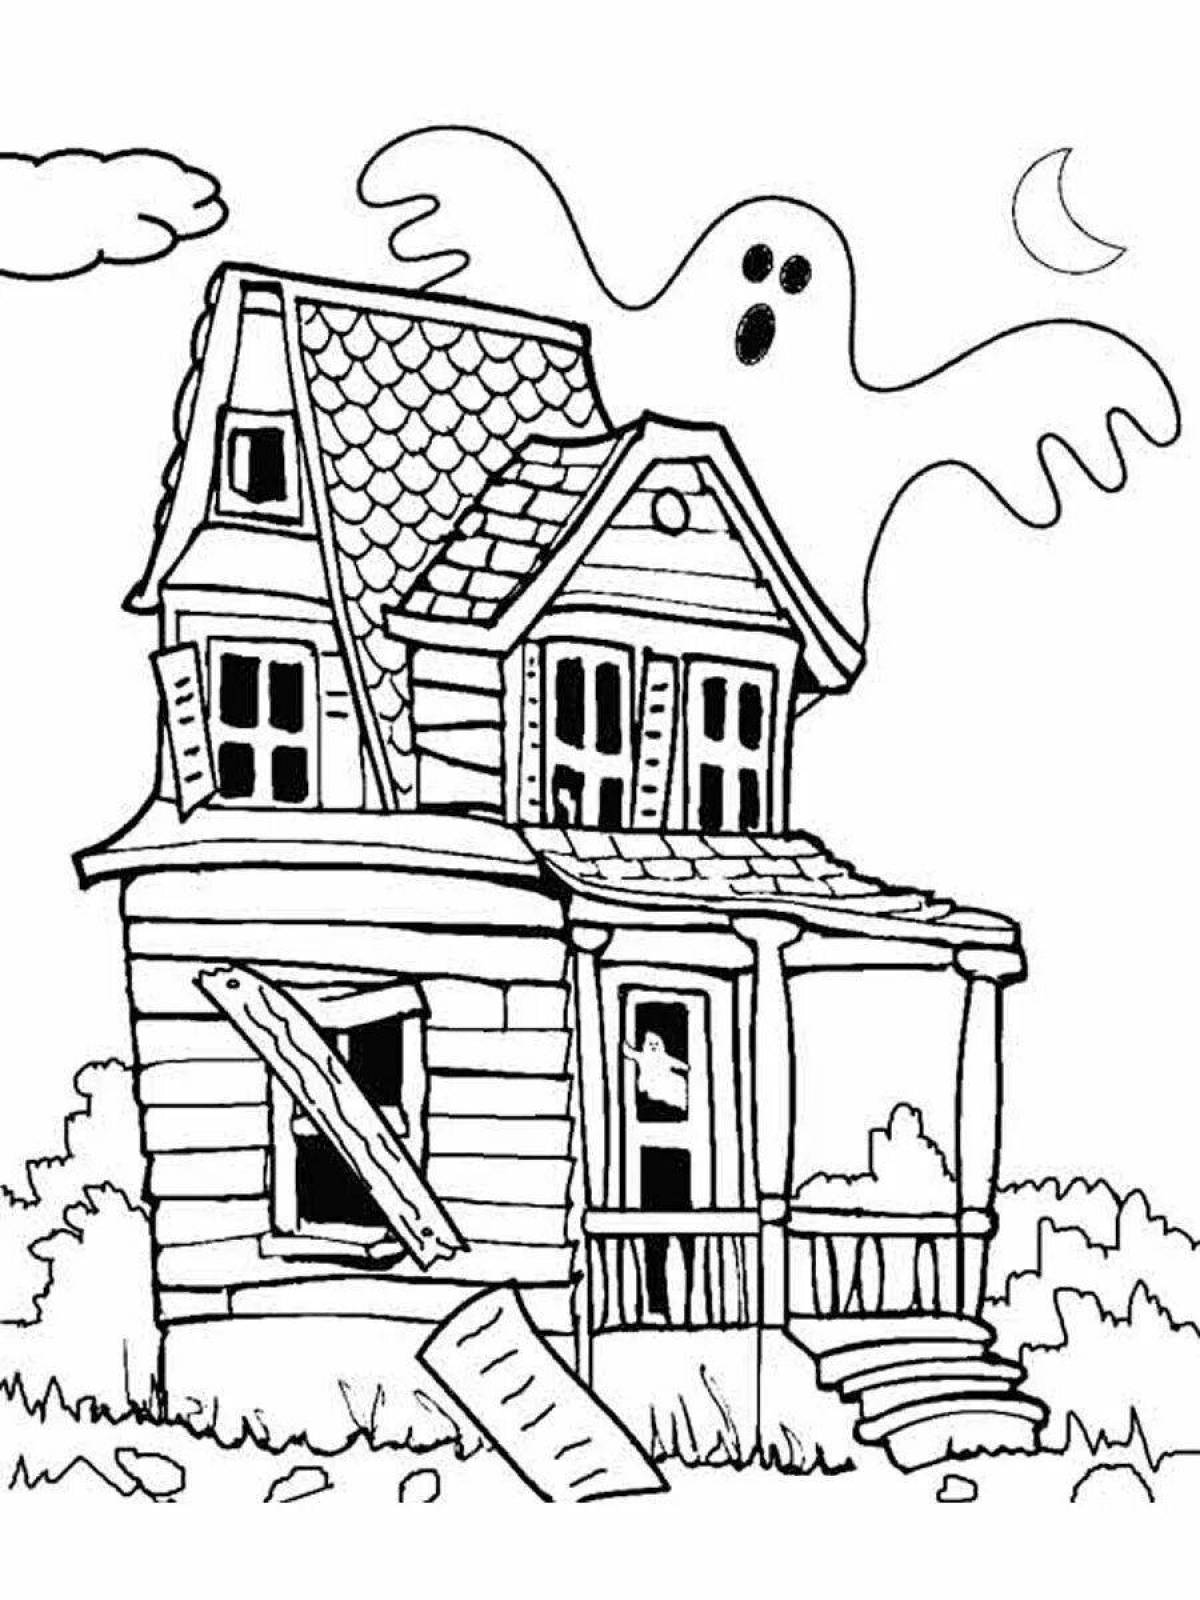 Coloring page creepy house that makes your back tingle